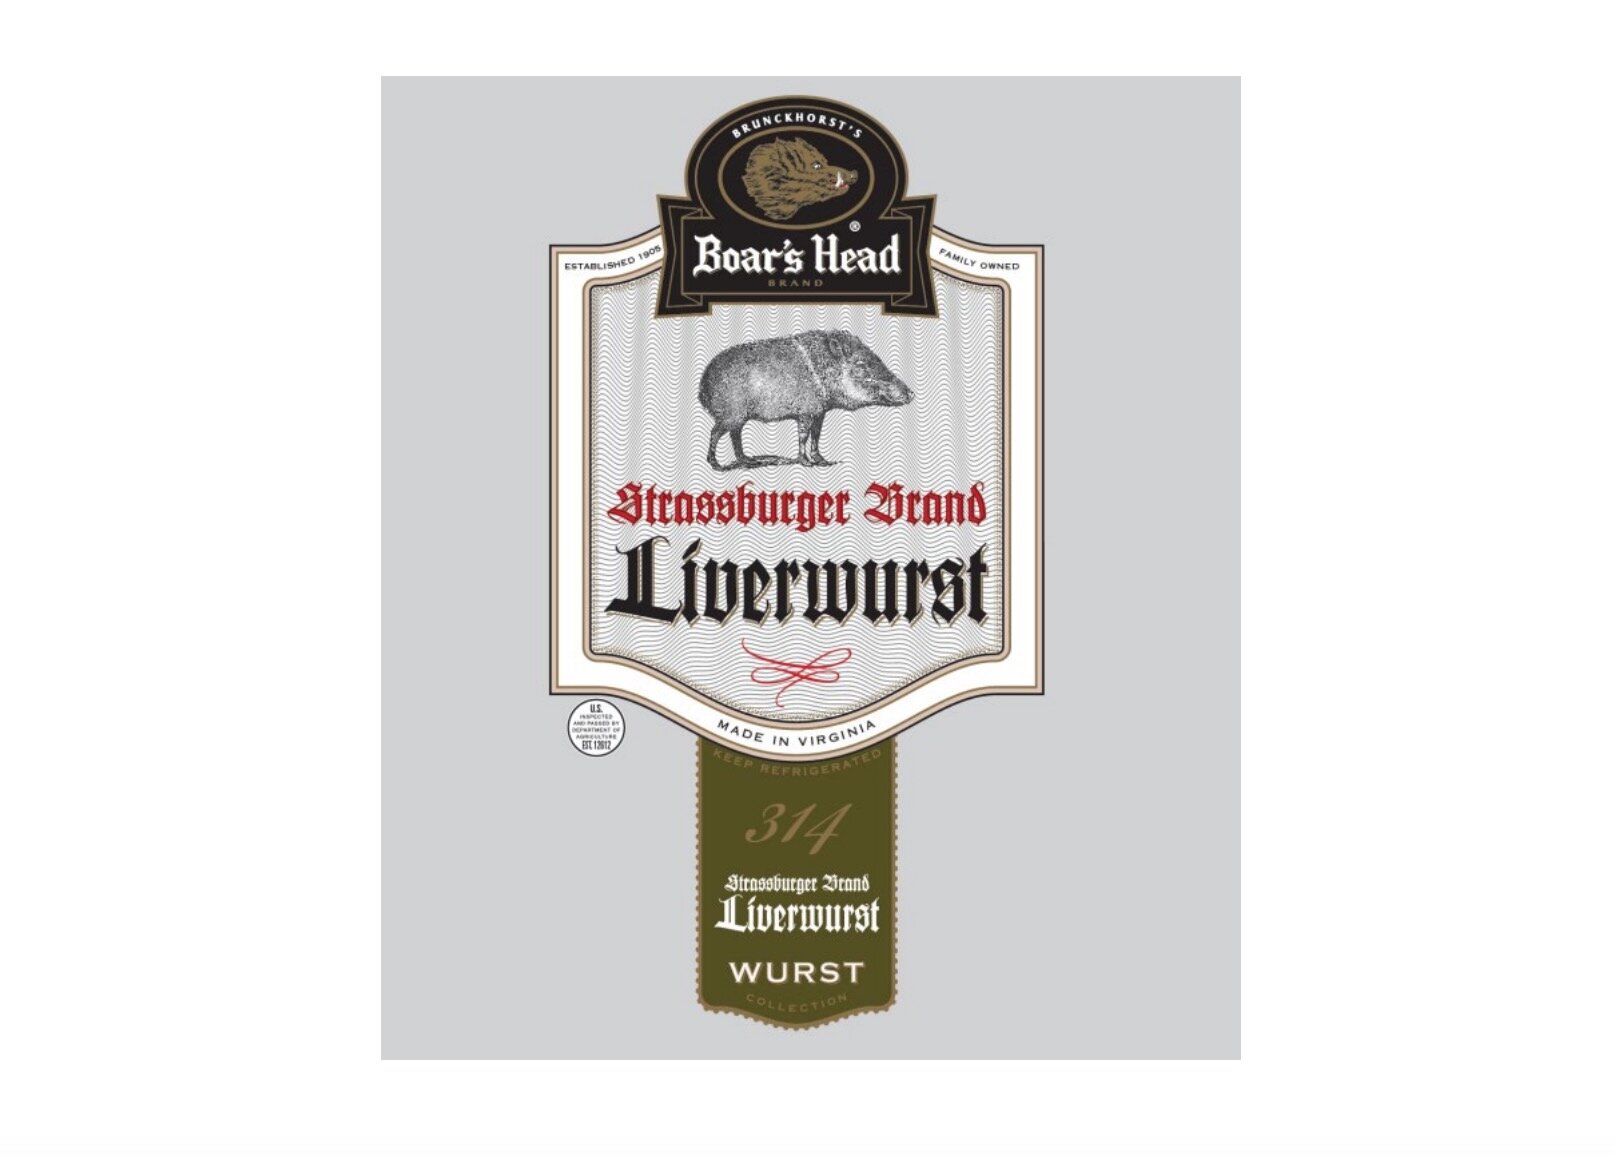 Boar’s head remembers liverwurst tied to listeria outbreak